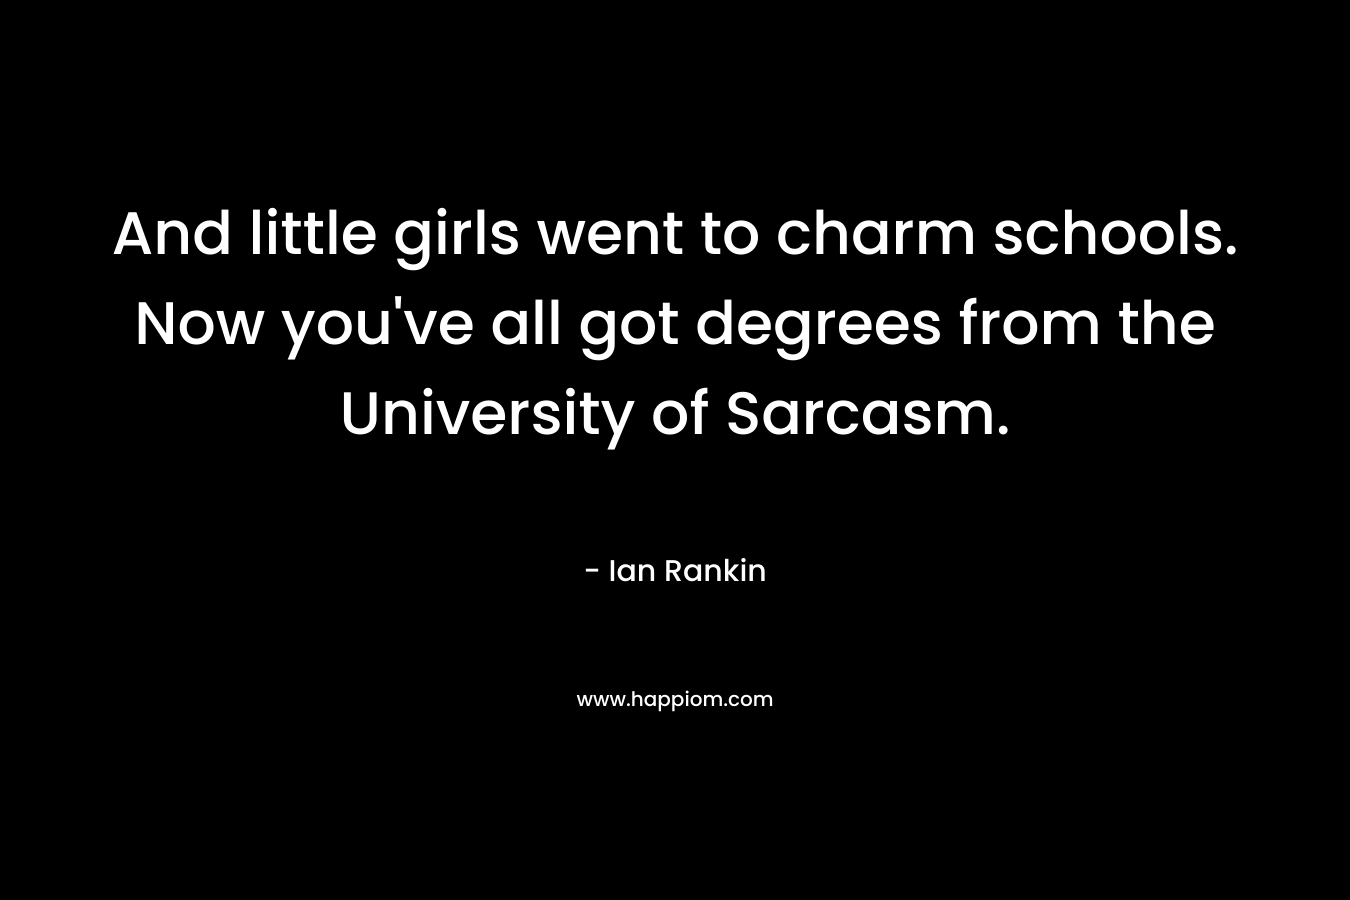 And little girls went to charm schools. Now you’ve all got degrees from the University of Sarcasm. – Ian Rankin